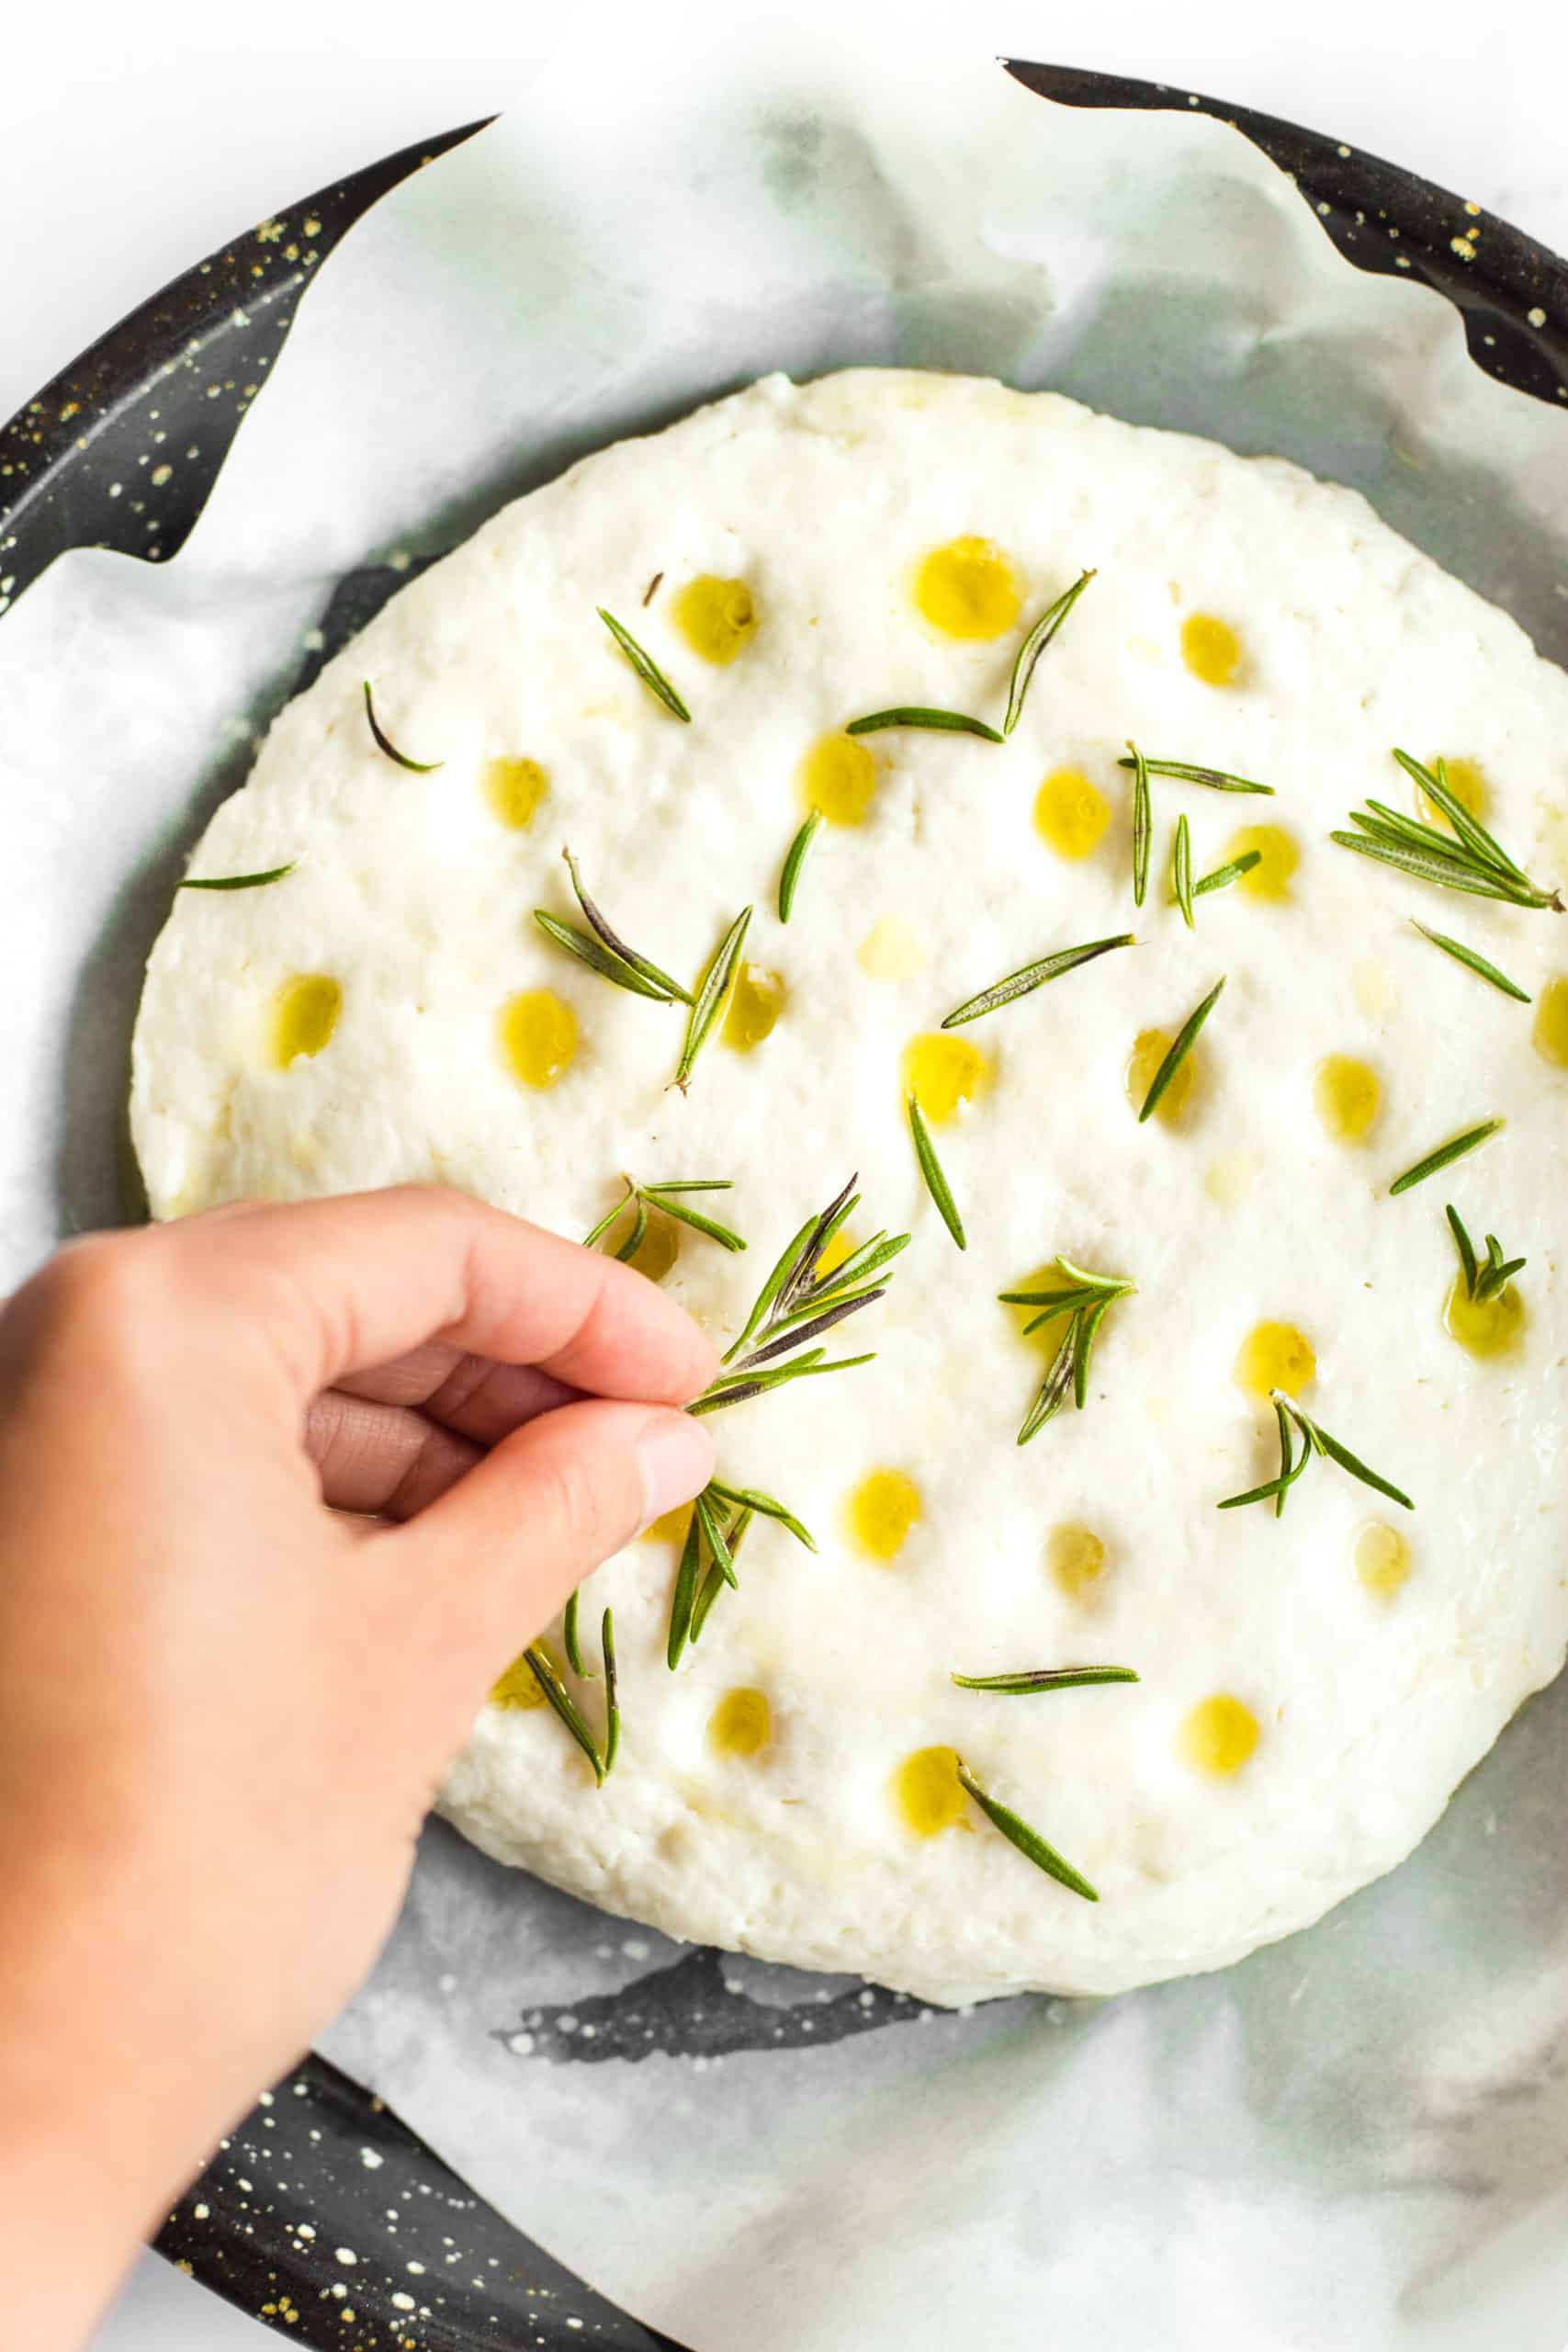 Sprinkling fresh rosemary leaves on top of gluten free focaccia dough.